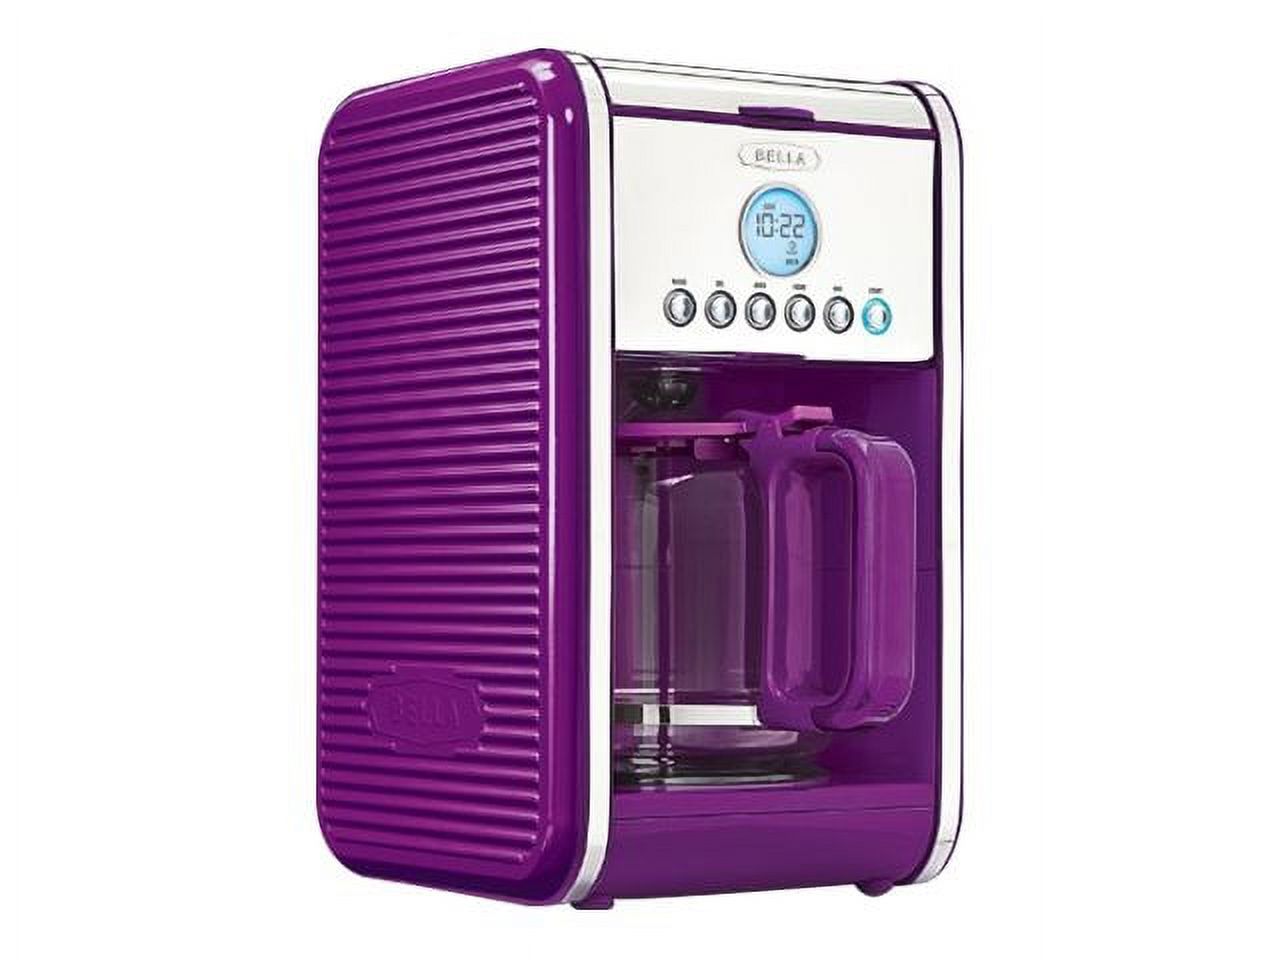 Bella Linea Collection 14117 - Coffee maker - 12 cups - purple - image 3 of 4